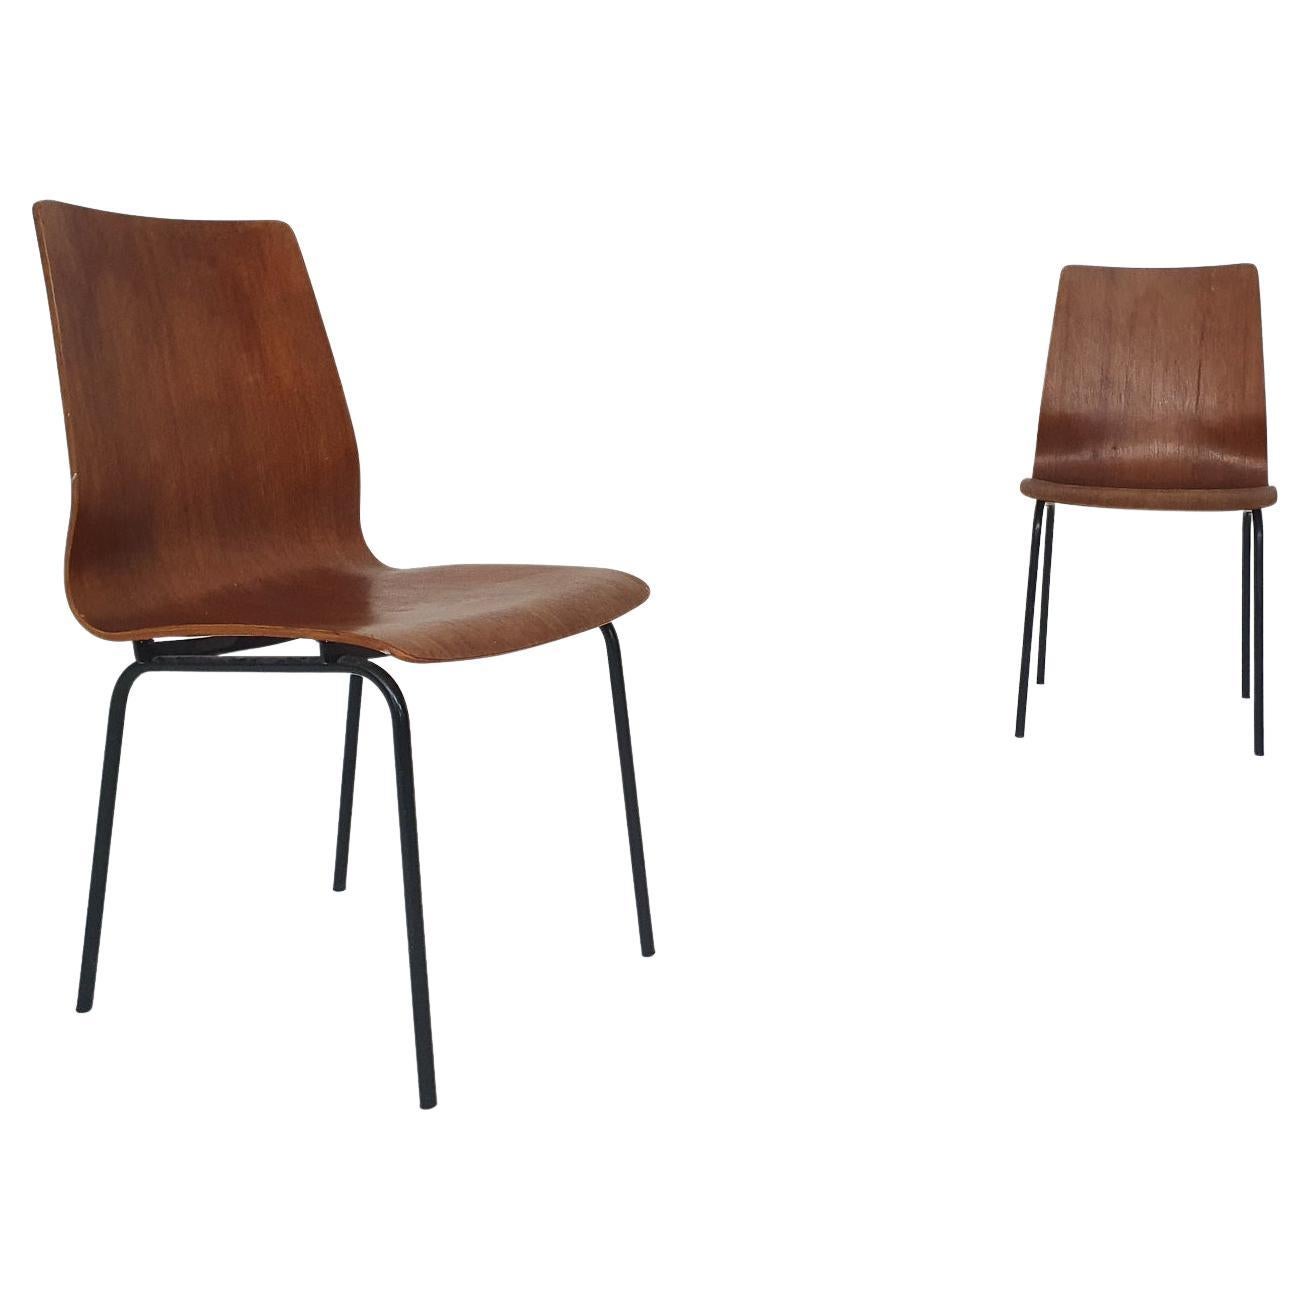 2x Friso Kramer for Auping '"Euroika" Plywood Chairs, the Netherlands, 1960's